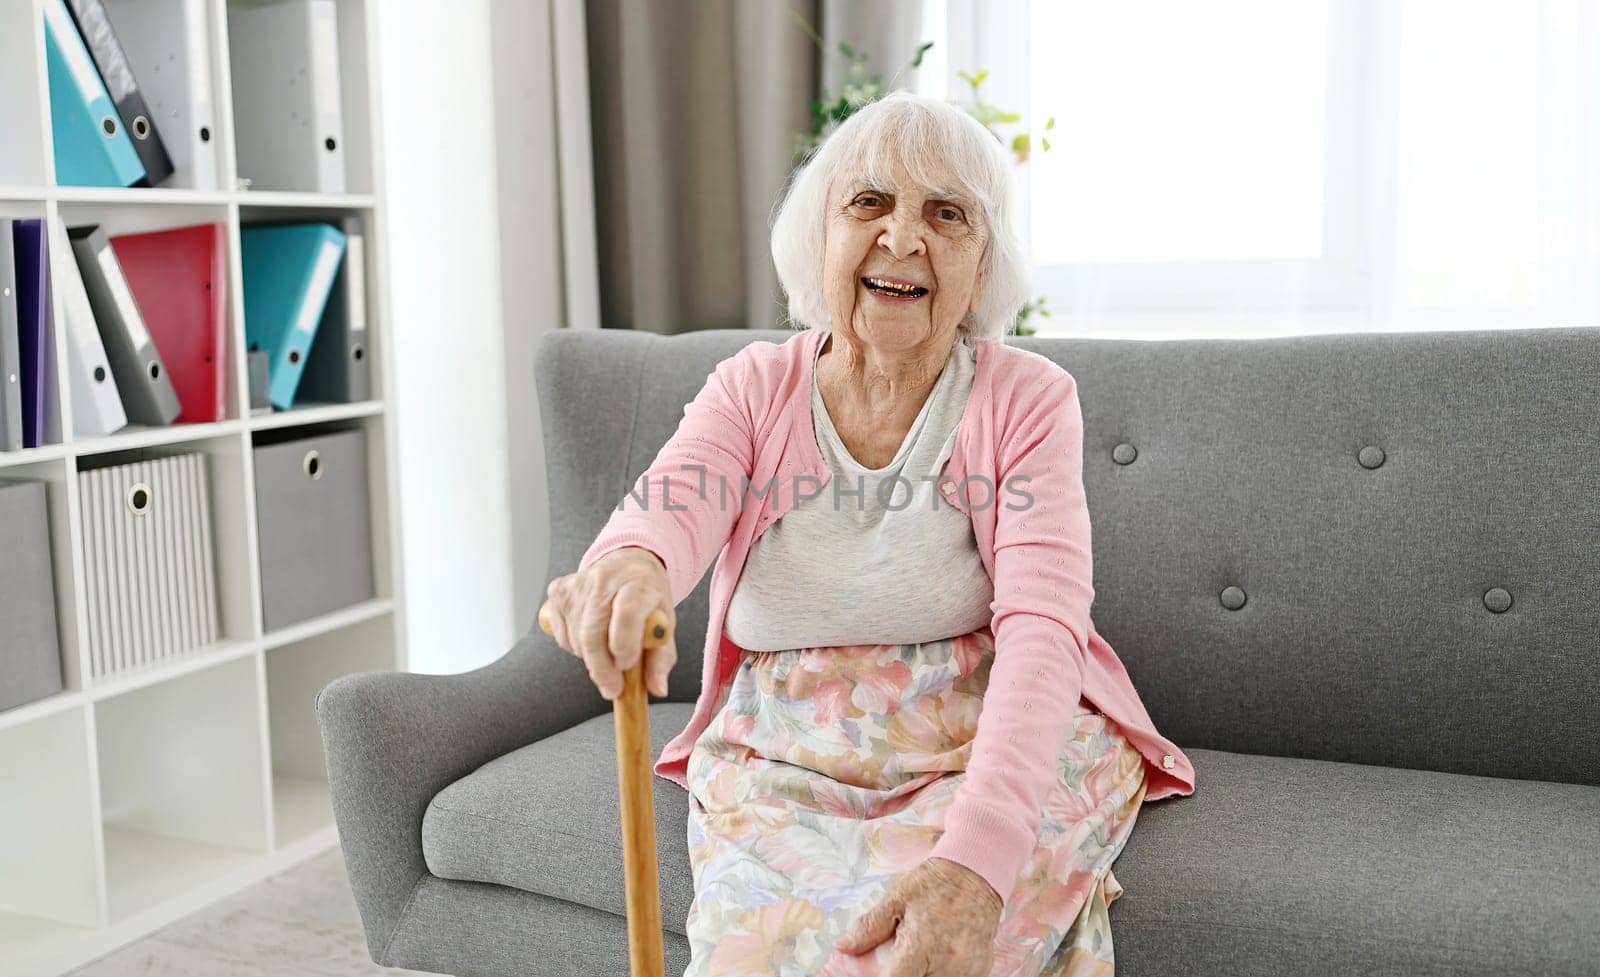 Elderly Woman Sitting On A Living Room Sofa Laughing And Looking Into The Camera by GekaSkr